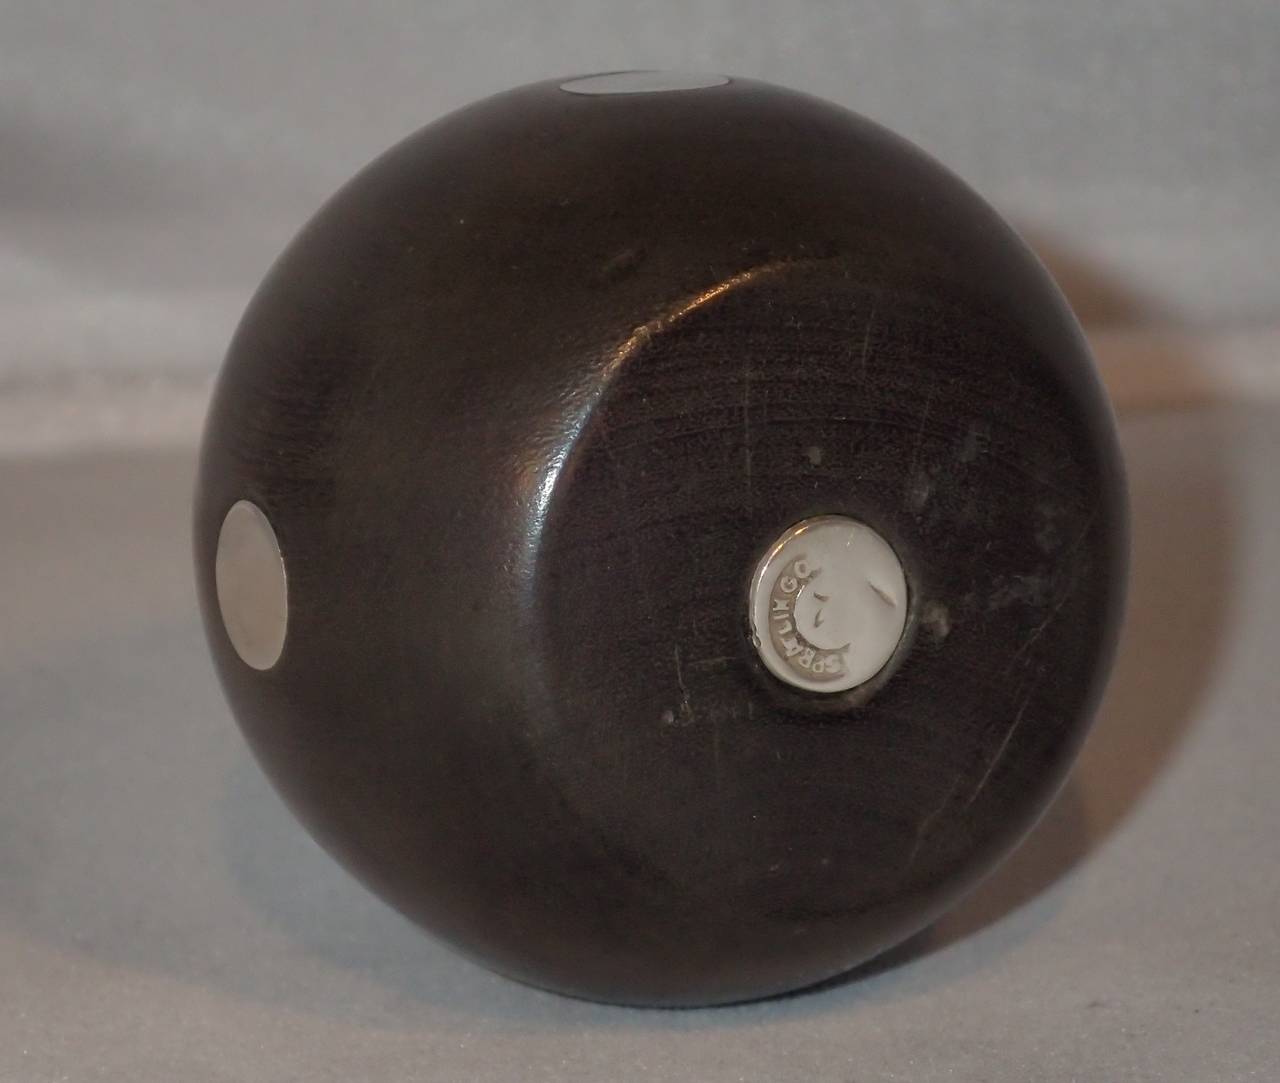 A charming ebony and silver inlaid polka dot motif candleholder by William Spratling. A carved formed sphere of ebony with four inlaid silver polka dots around the outer circumference and topped with an inset silver bowl shaped candle cup.
Stamp: